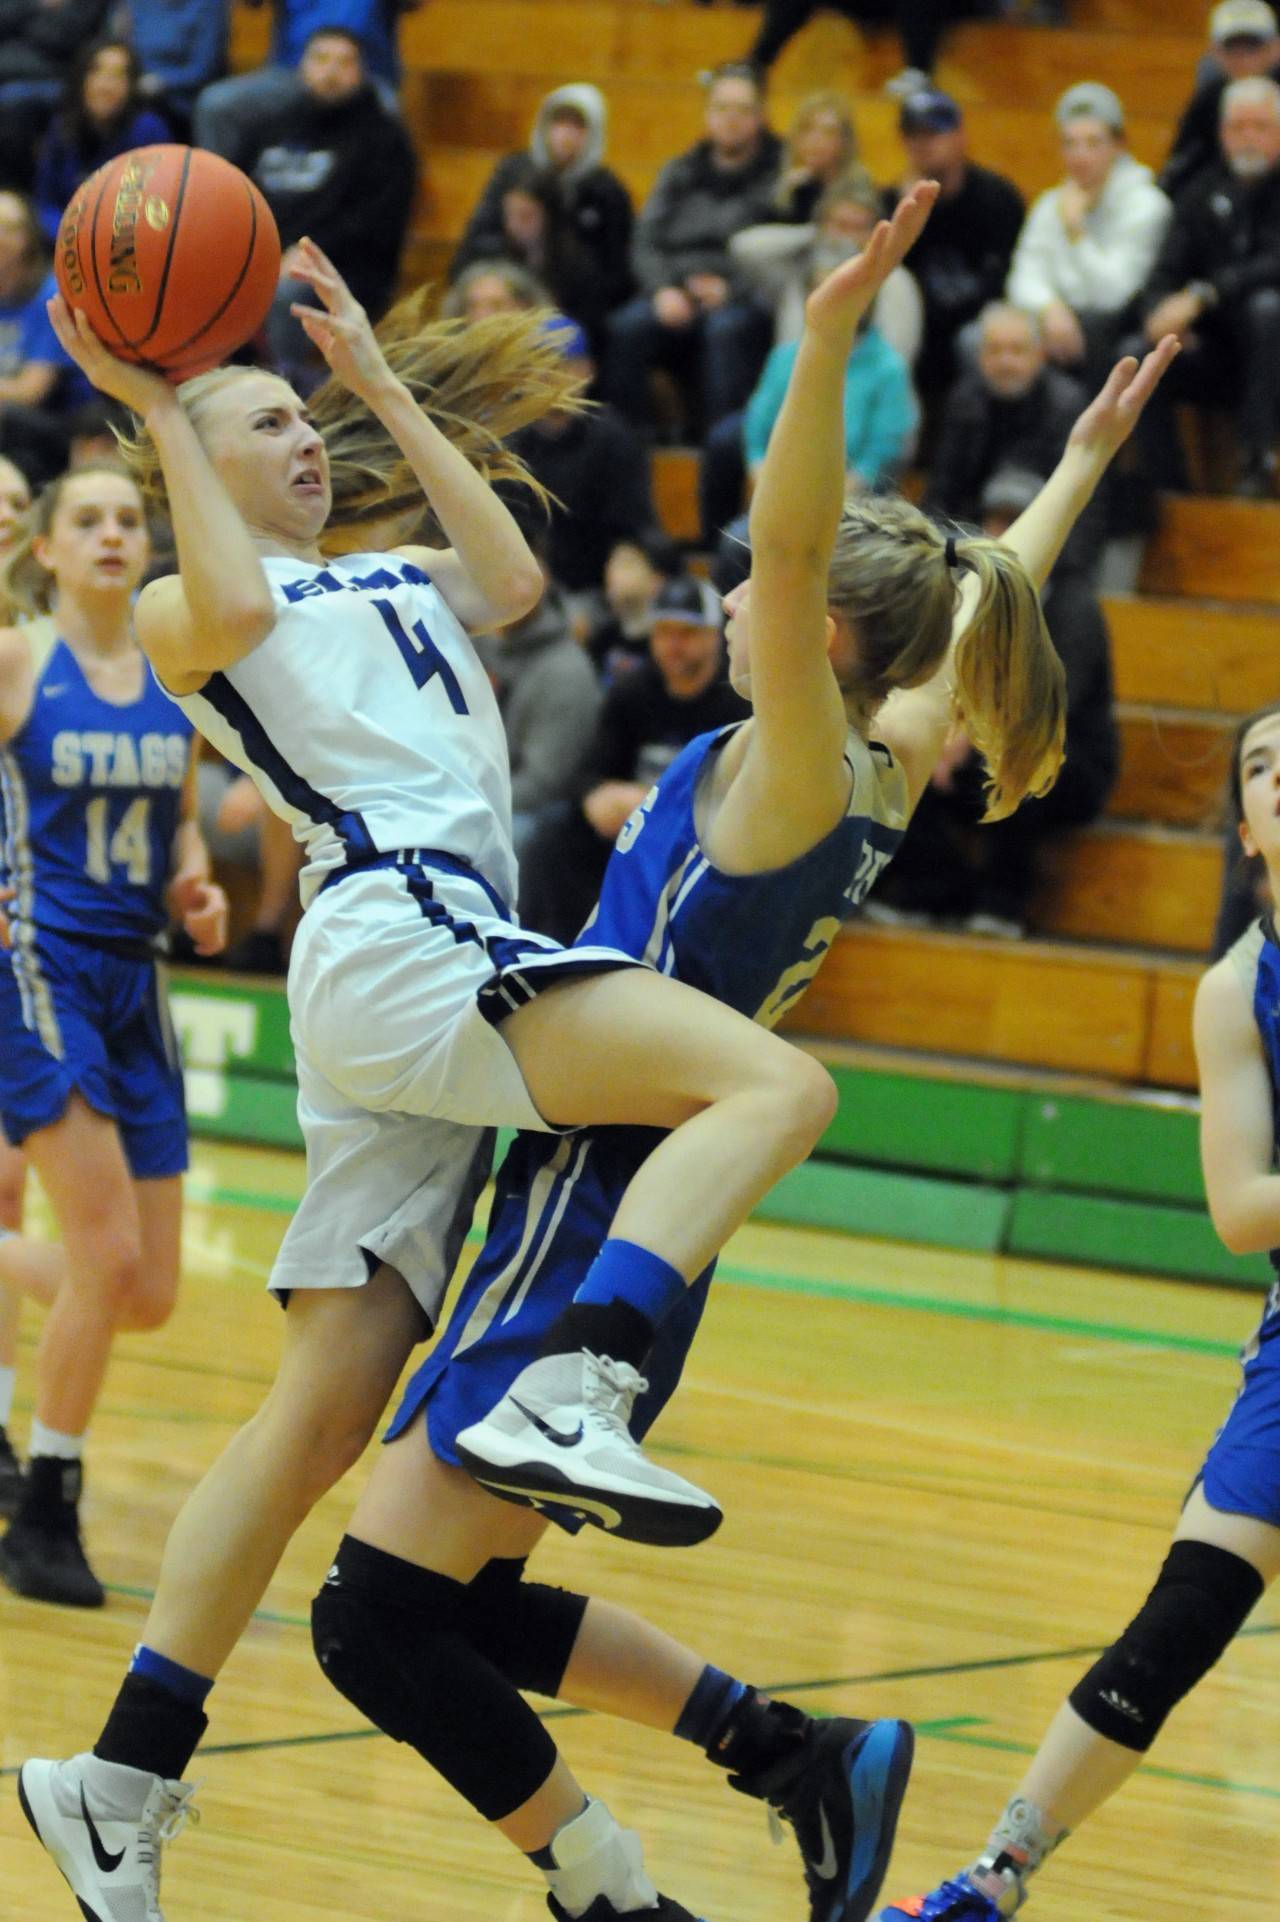 Elma guard Jillian bieker (4) drives to the basket against Deer Park’s Anna Patterson during the Eagles’ 39-38 win in the 1A Girls Basketball Regionals on Saturday at Tumwater High School. (Ryan Sparks | Grays Harbor News Group)